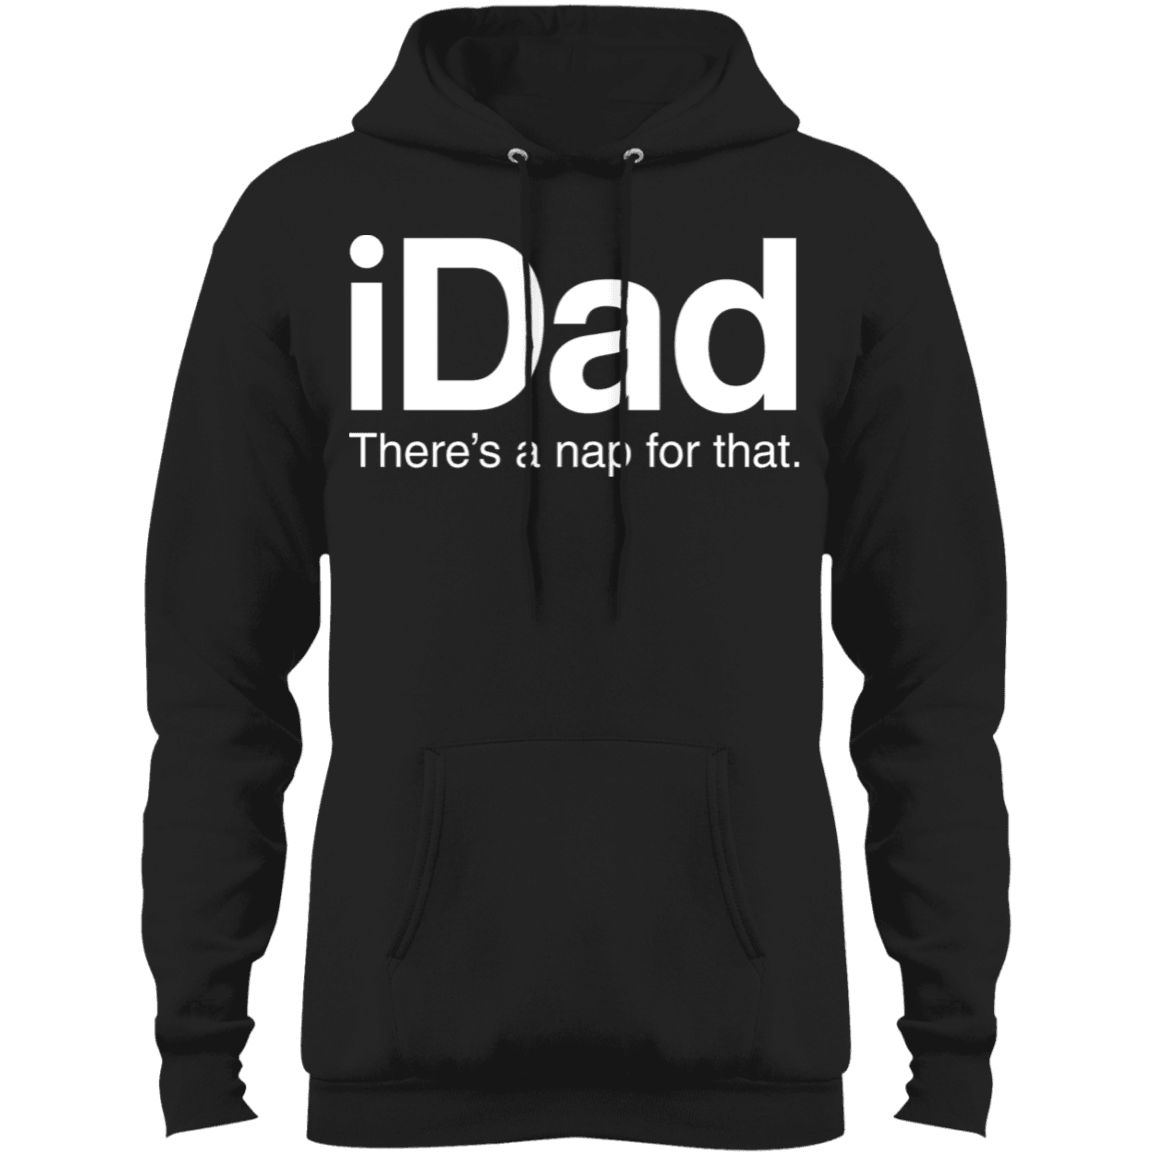 Designs by MyUtopia Shout Out:iDad There's a Nap For That Core Fleece Pullover Hoodie,Jet Black / S,Sweatshirts